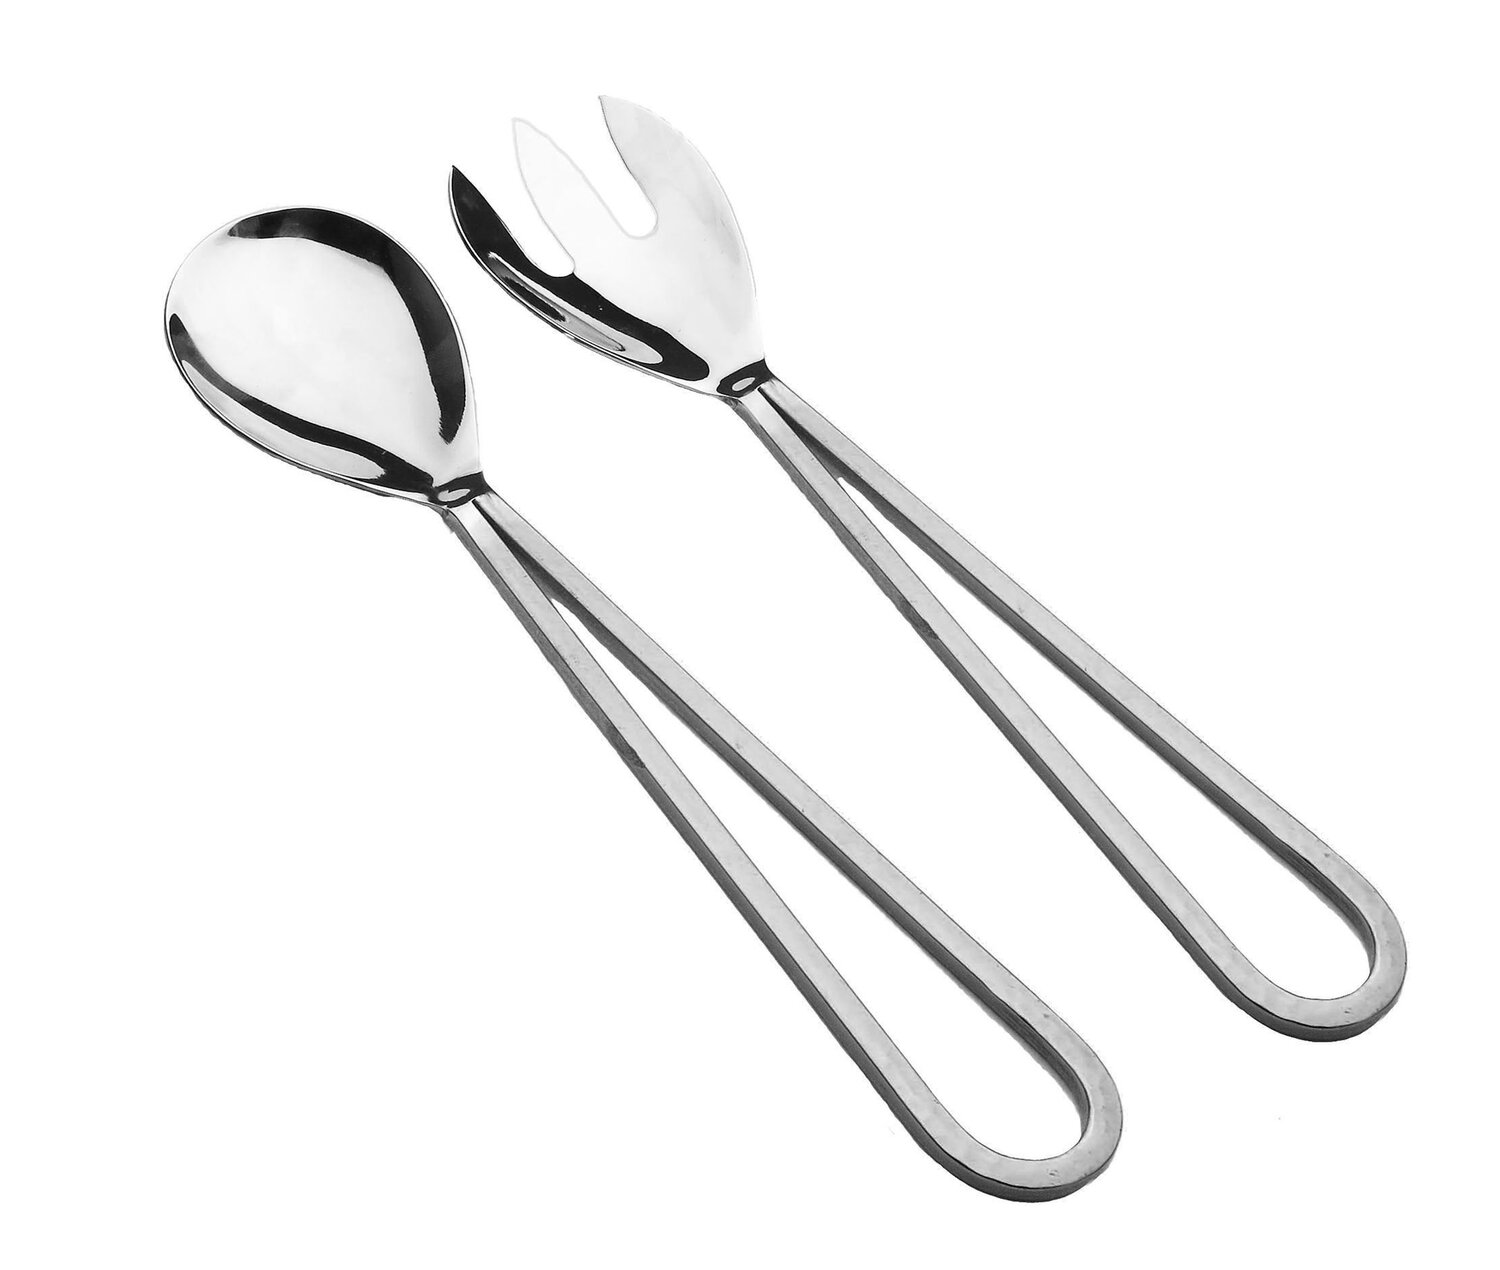 Aida Raw Sauce Ladle & Serving Spoon - Serving Cutlery Stainless Steel Gold - 15513